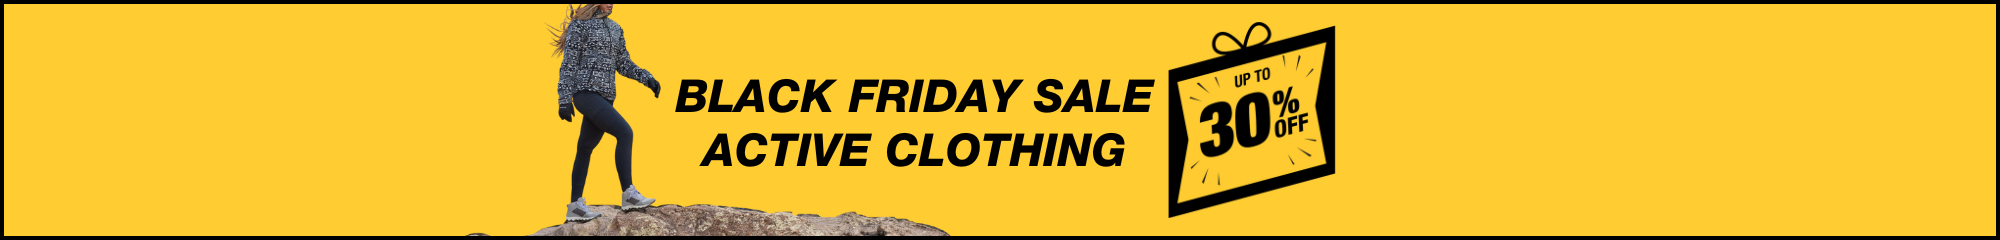 black friday sale women's active clothing